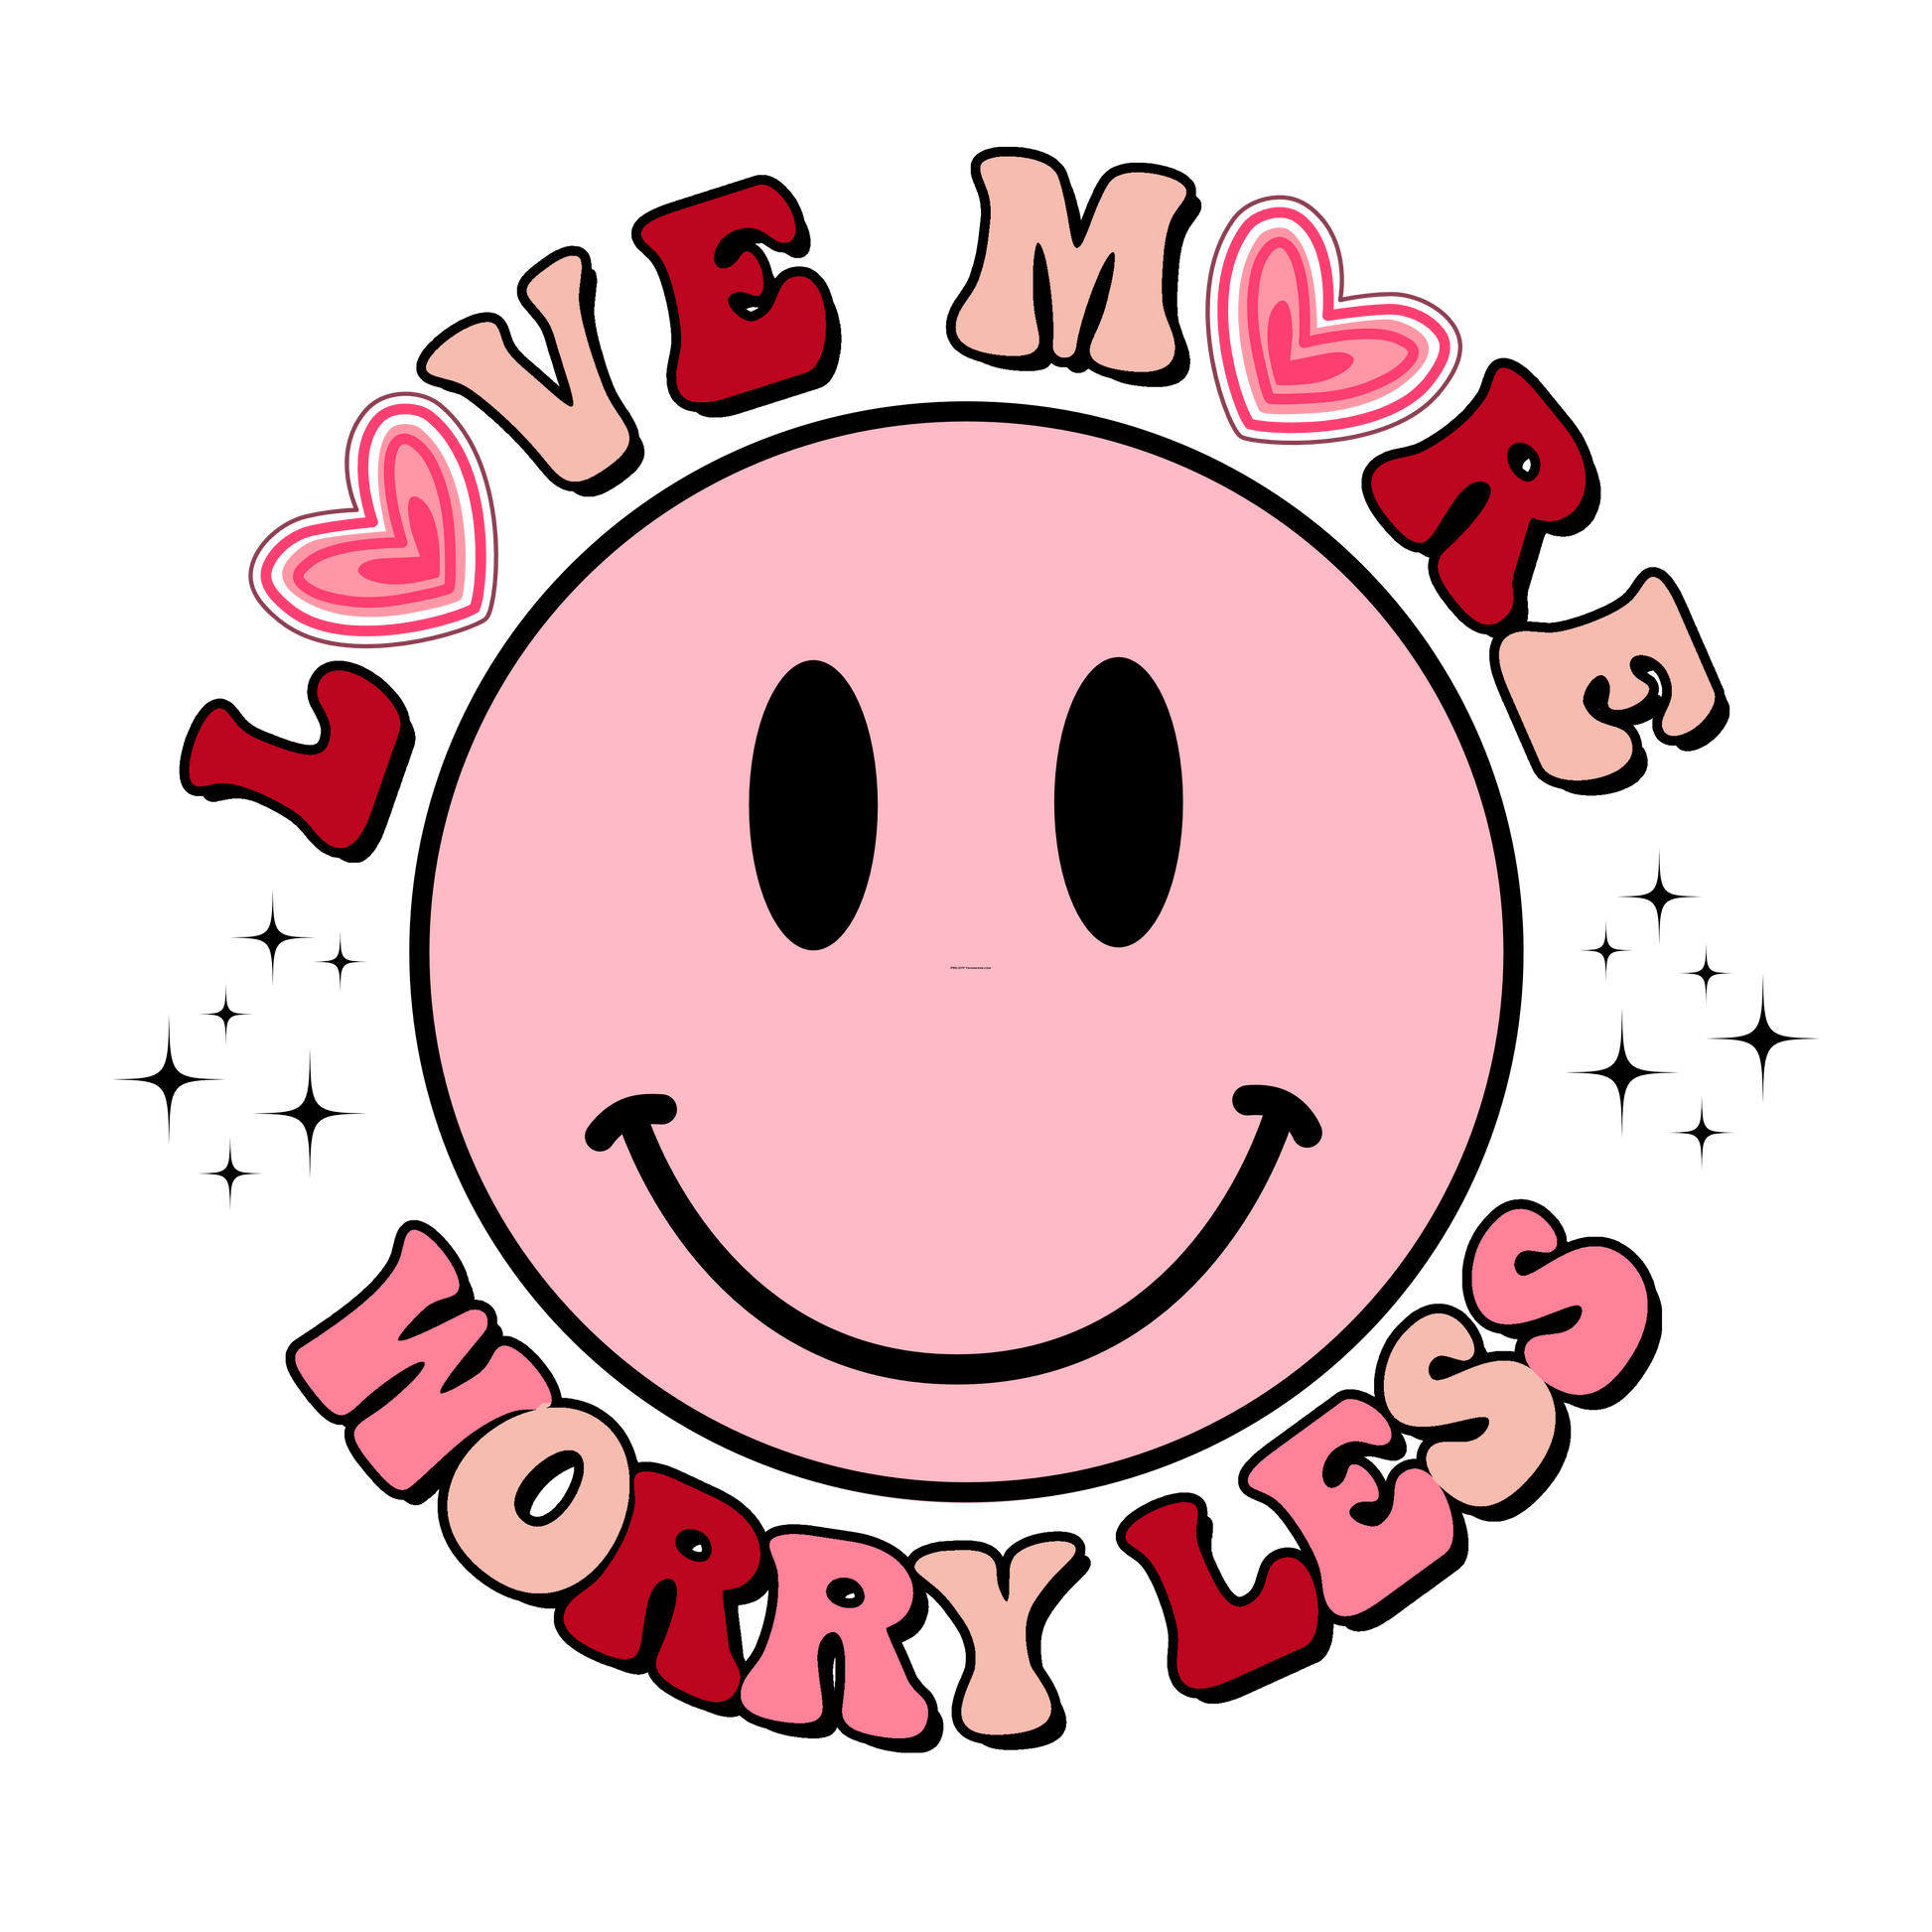 Love More Worry Less Full Color Transfer - Pro DTF Transfers